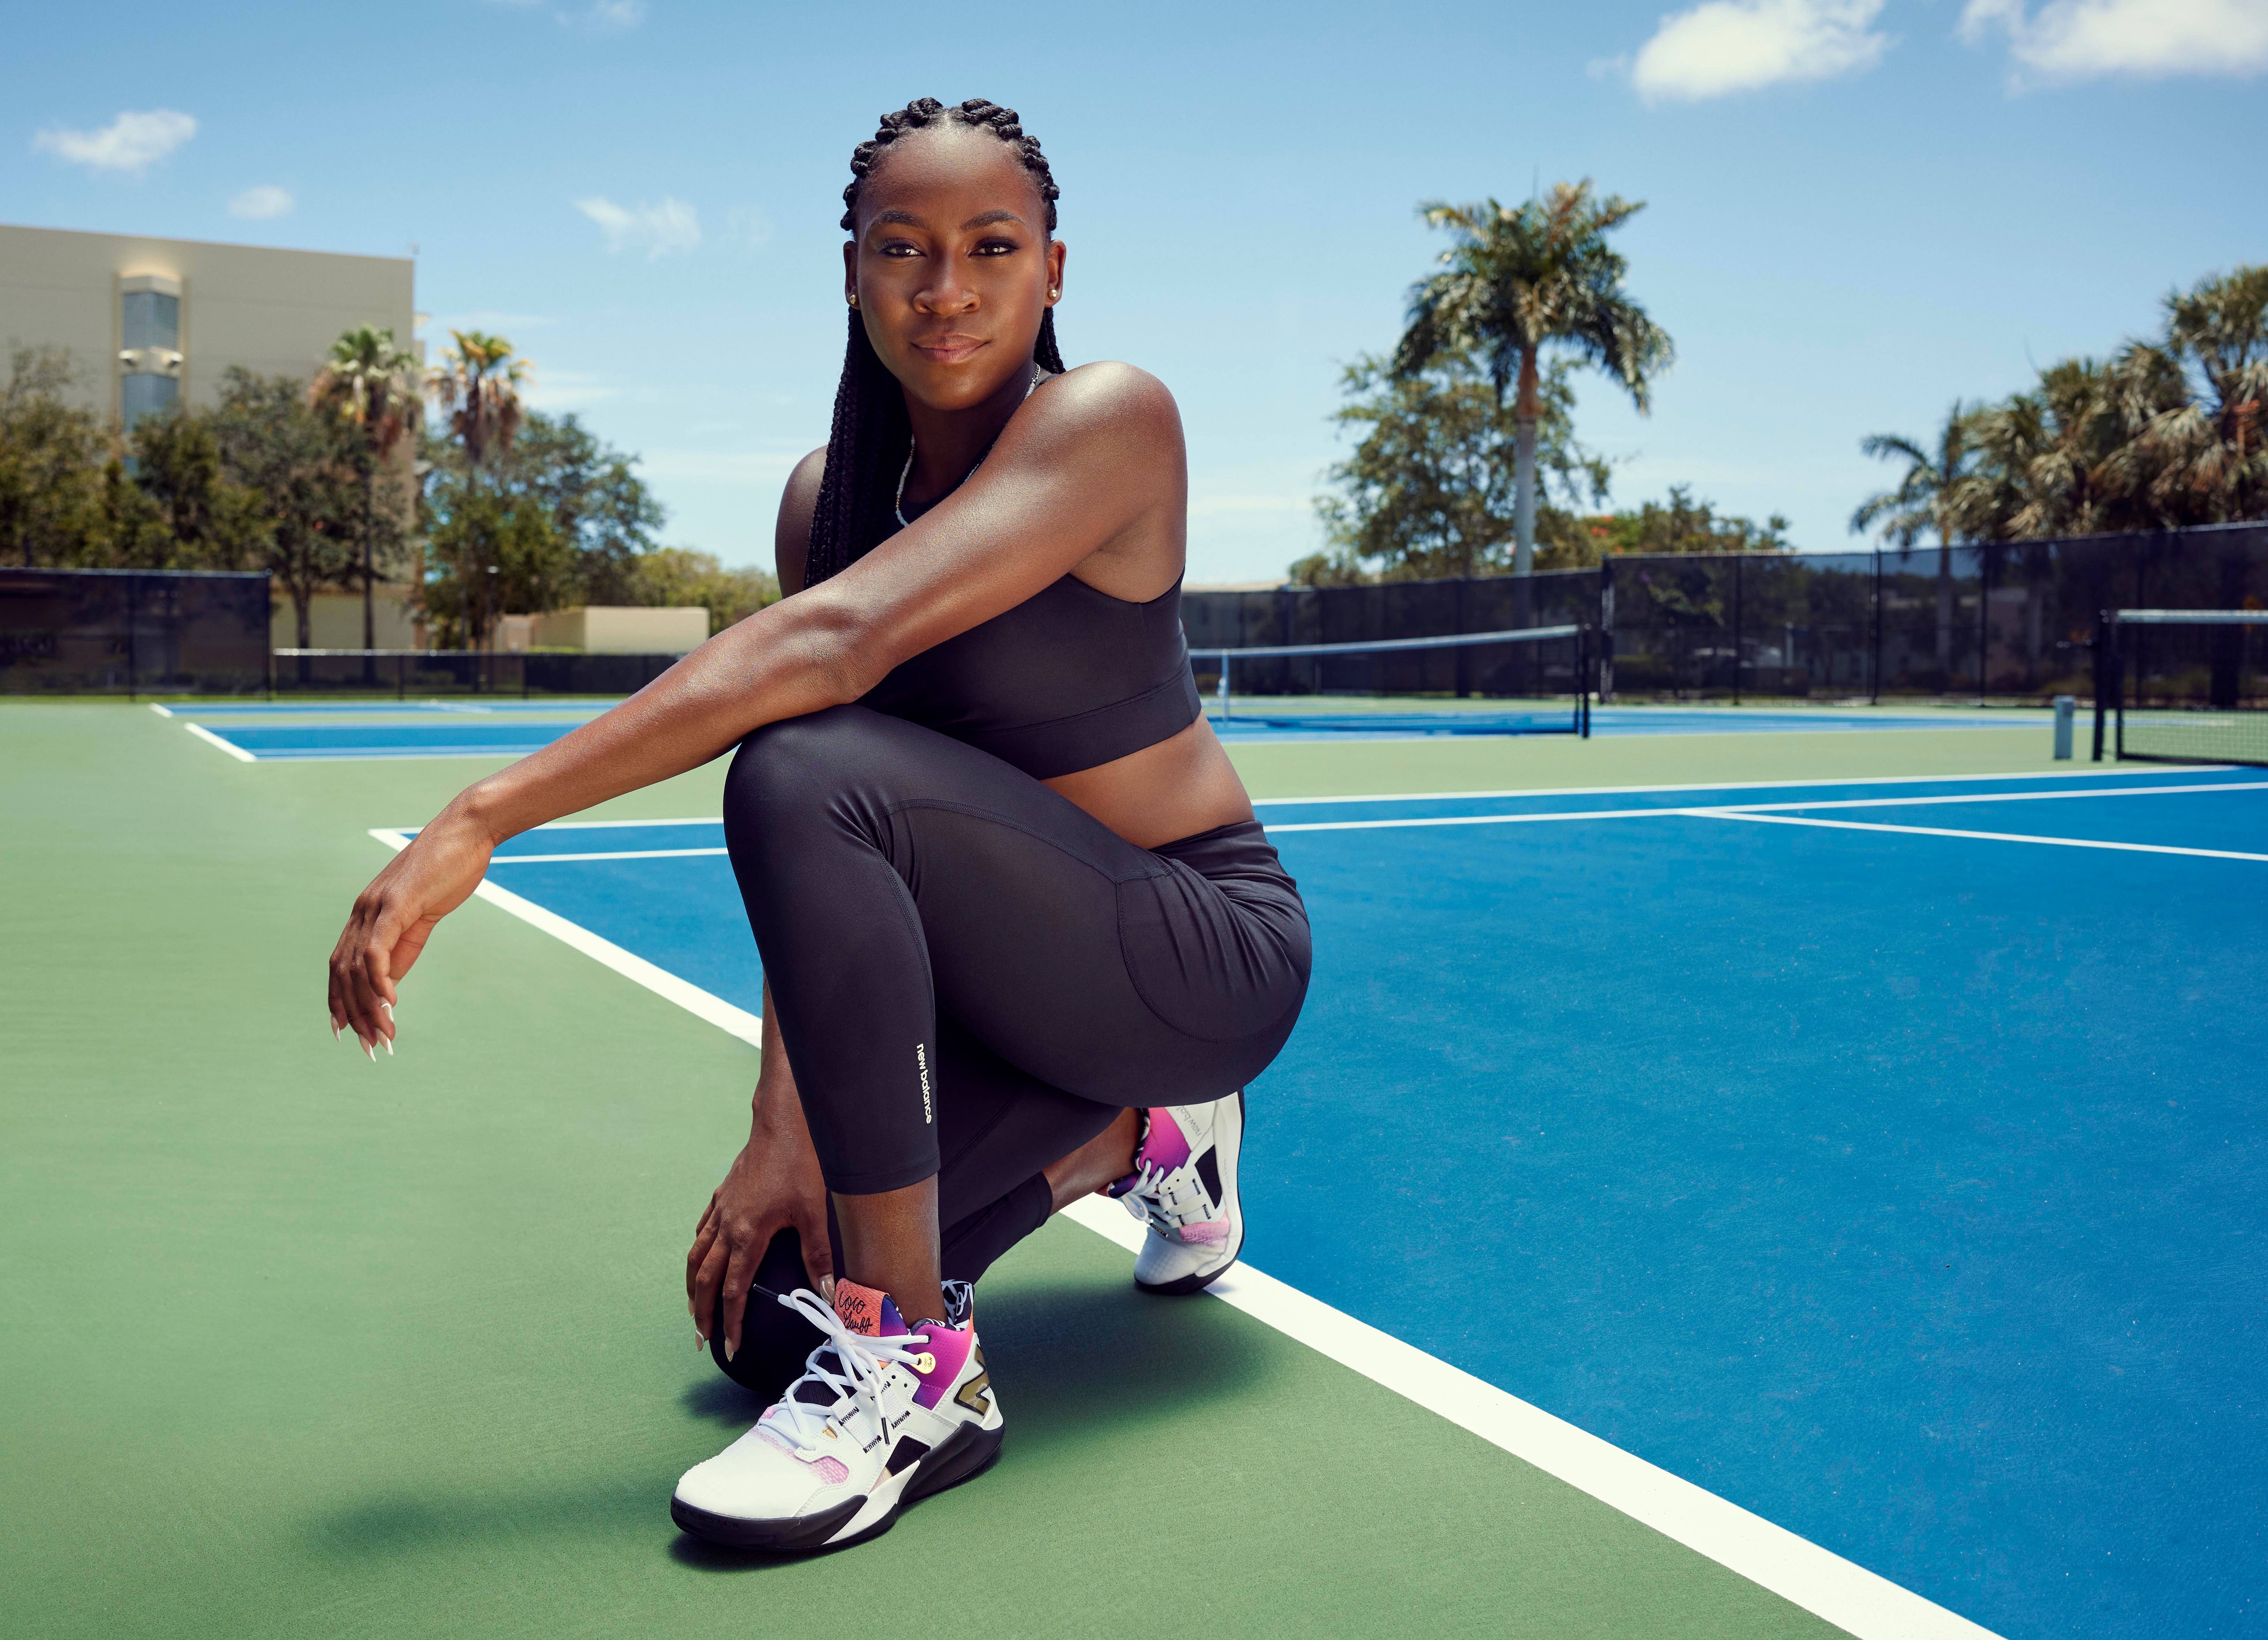 Tennis player Coco Gauff wearing her New Balance Coco CG1 sneaker on a tennis court